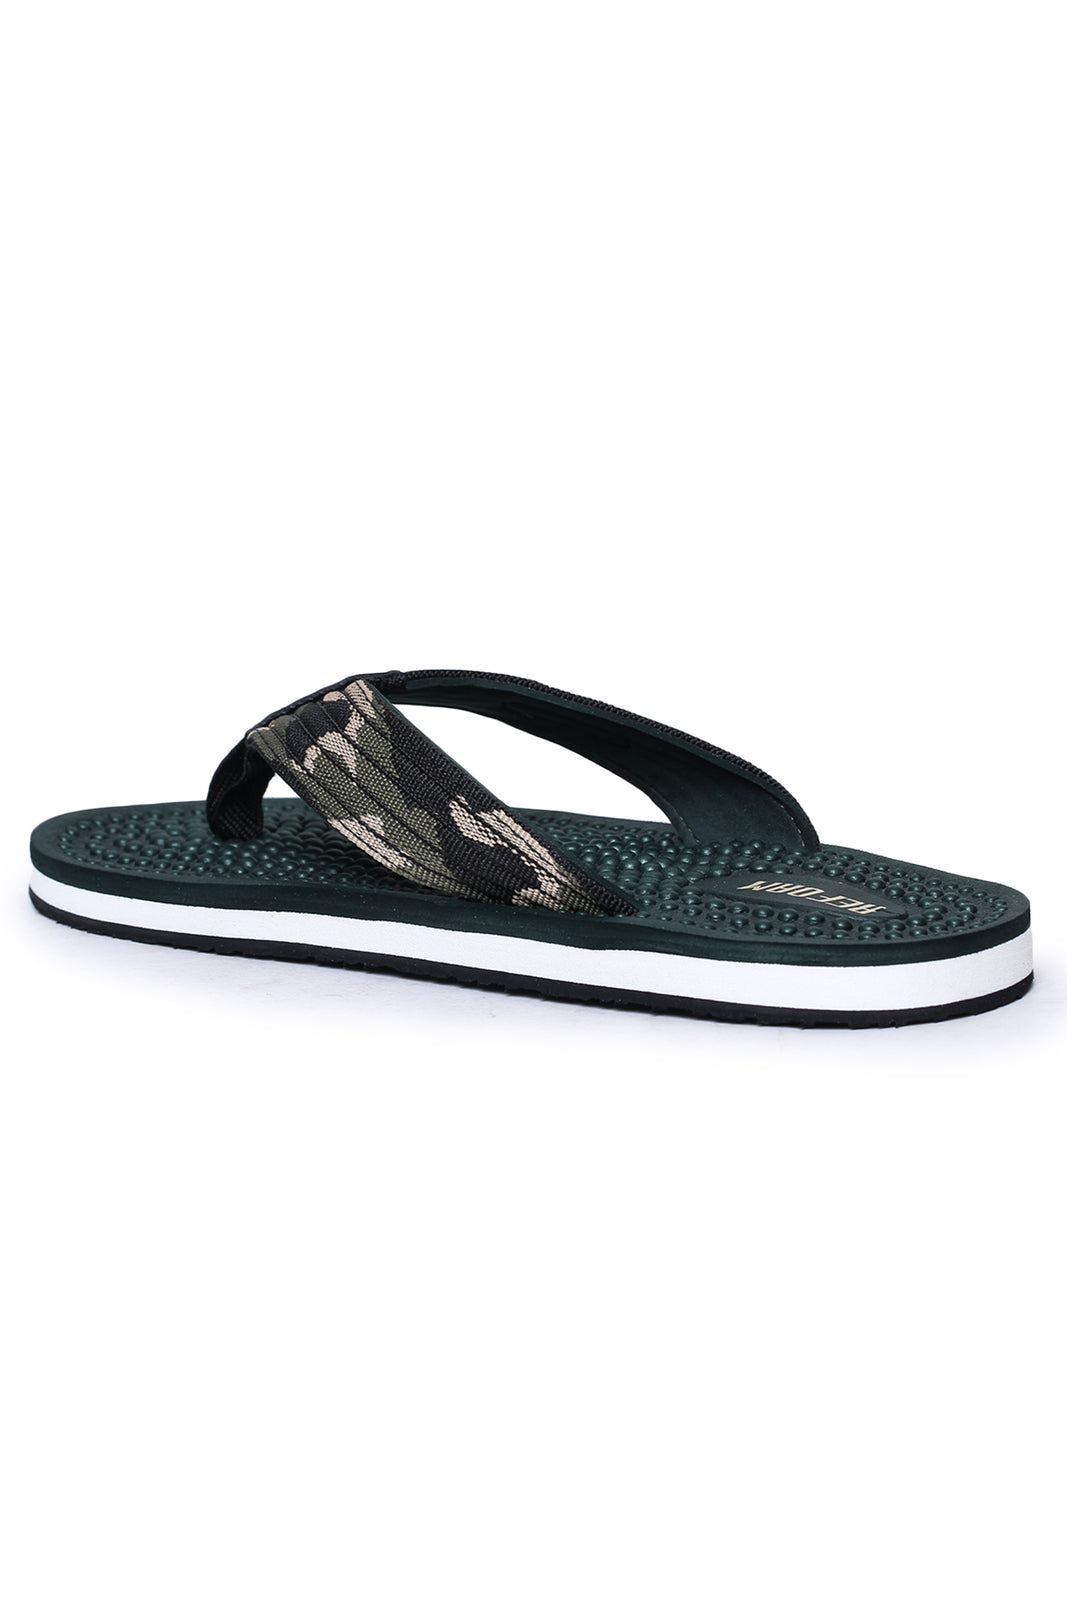 Green Solid Fabric Slip On Casual Slippers For Men